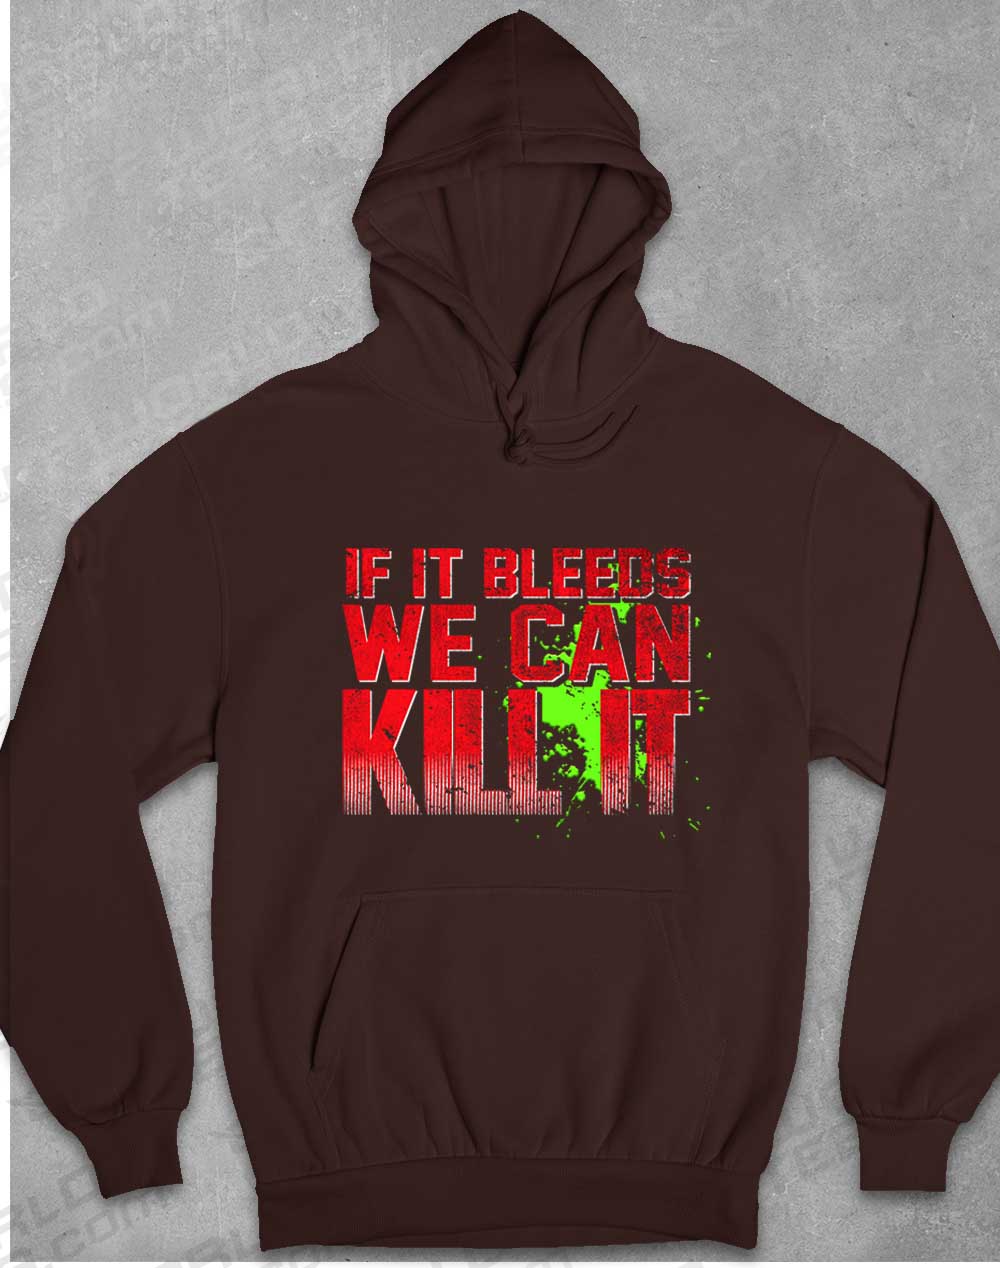 Hot Chocolate - If It Bleeds We Can Kill It Hoodie